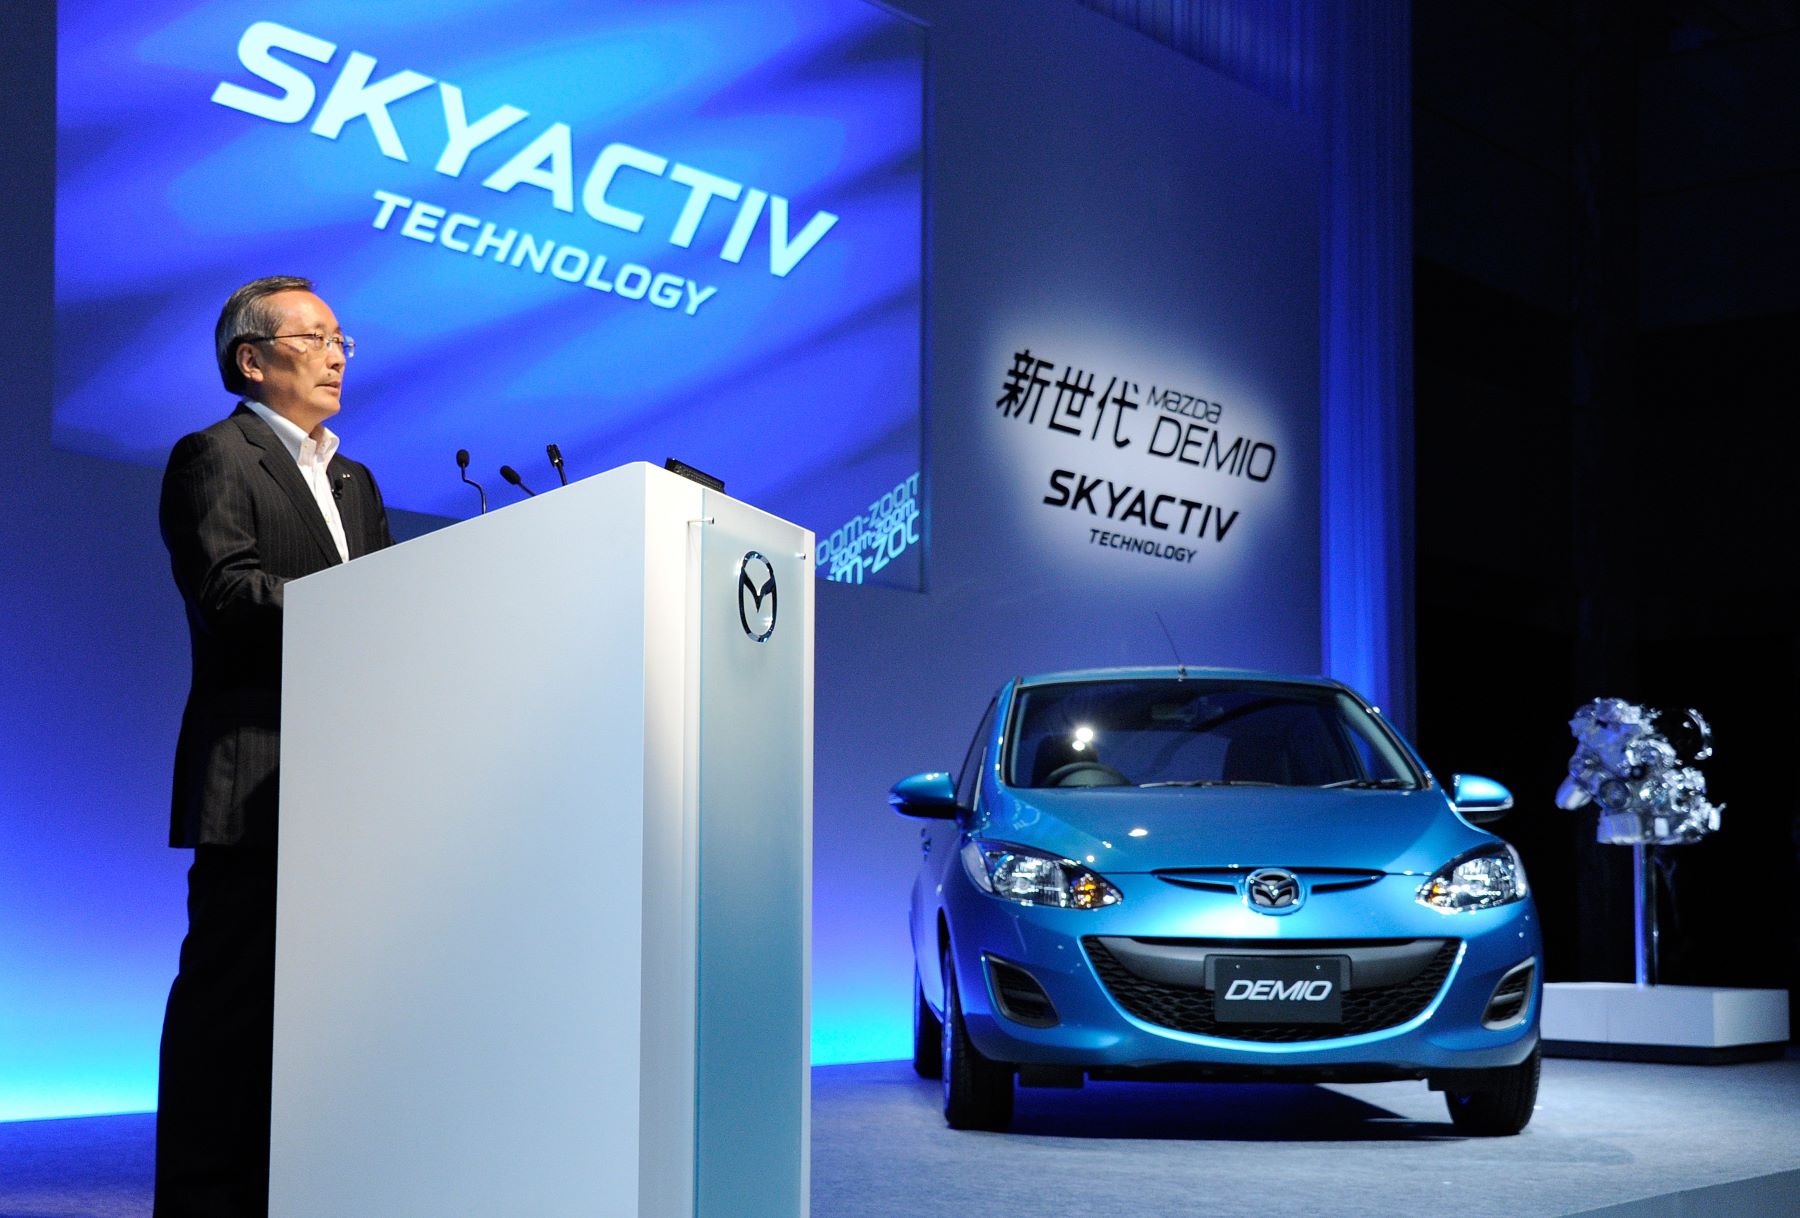 Demio car with SKYACTIV-G 1.3 engine was shown at Mazda launch event in Tokyo, Japan